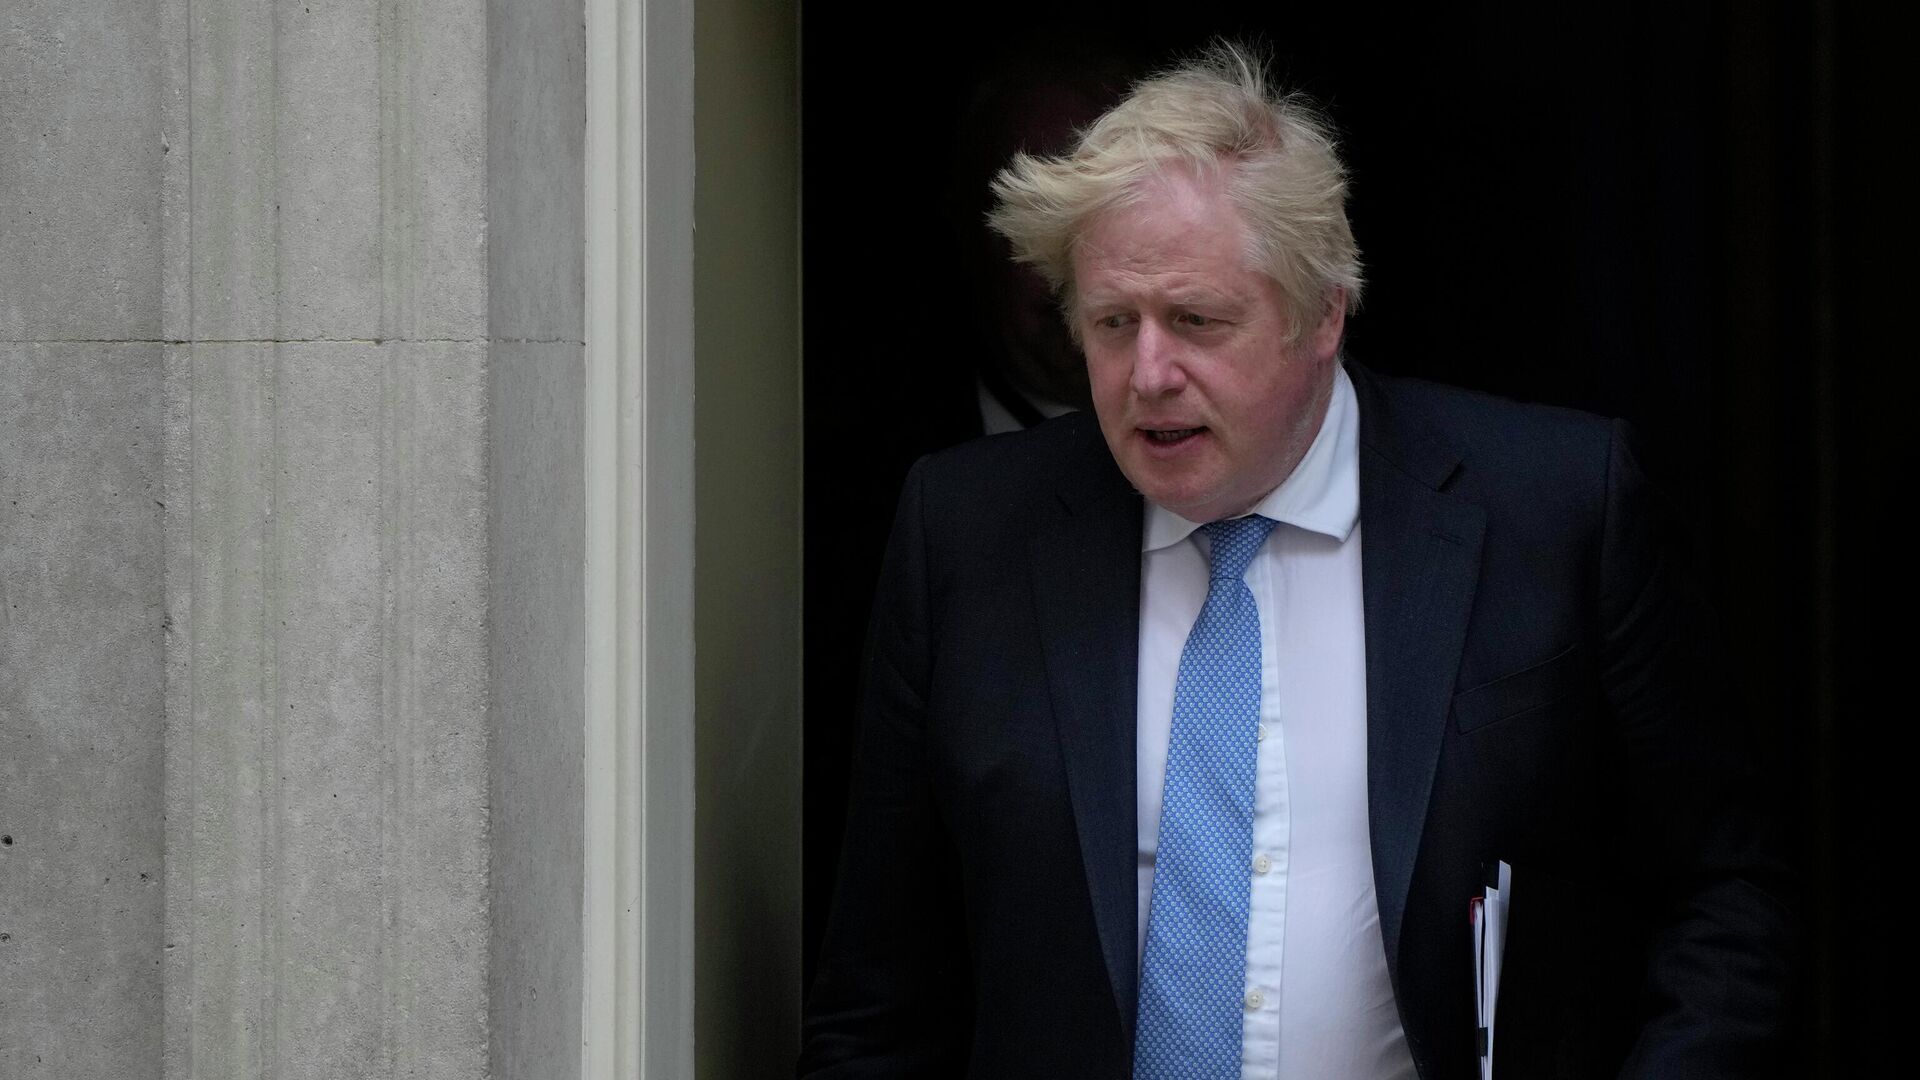 Britain's Prime Minister Boris Johnson leaves 10 Downing Street for the House of Commons to make a statement about Downing Street parties during the coronavirus lockdowns in London, Tuesday, April 19, 2022 - Sputnik International, 1920, 25.05.2022